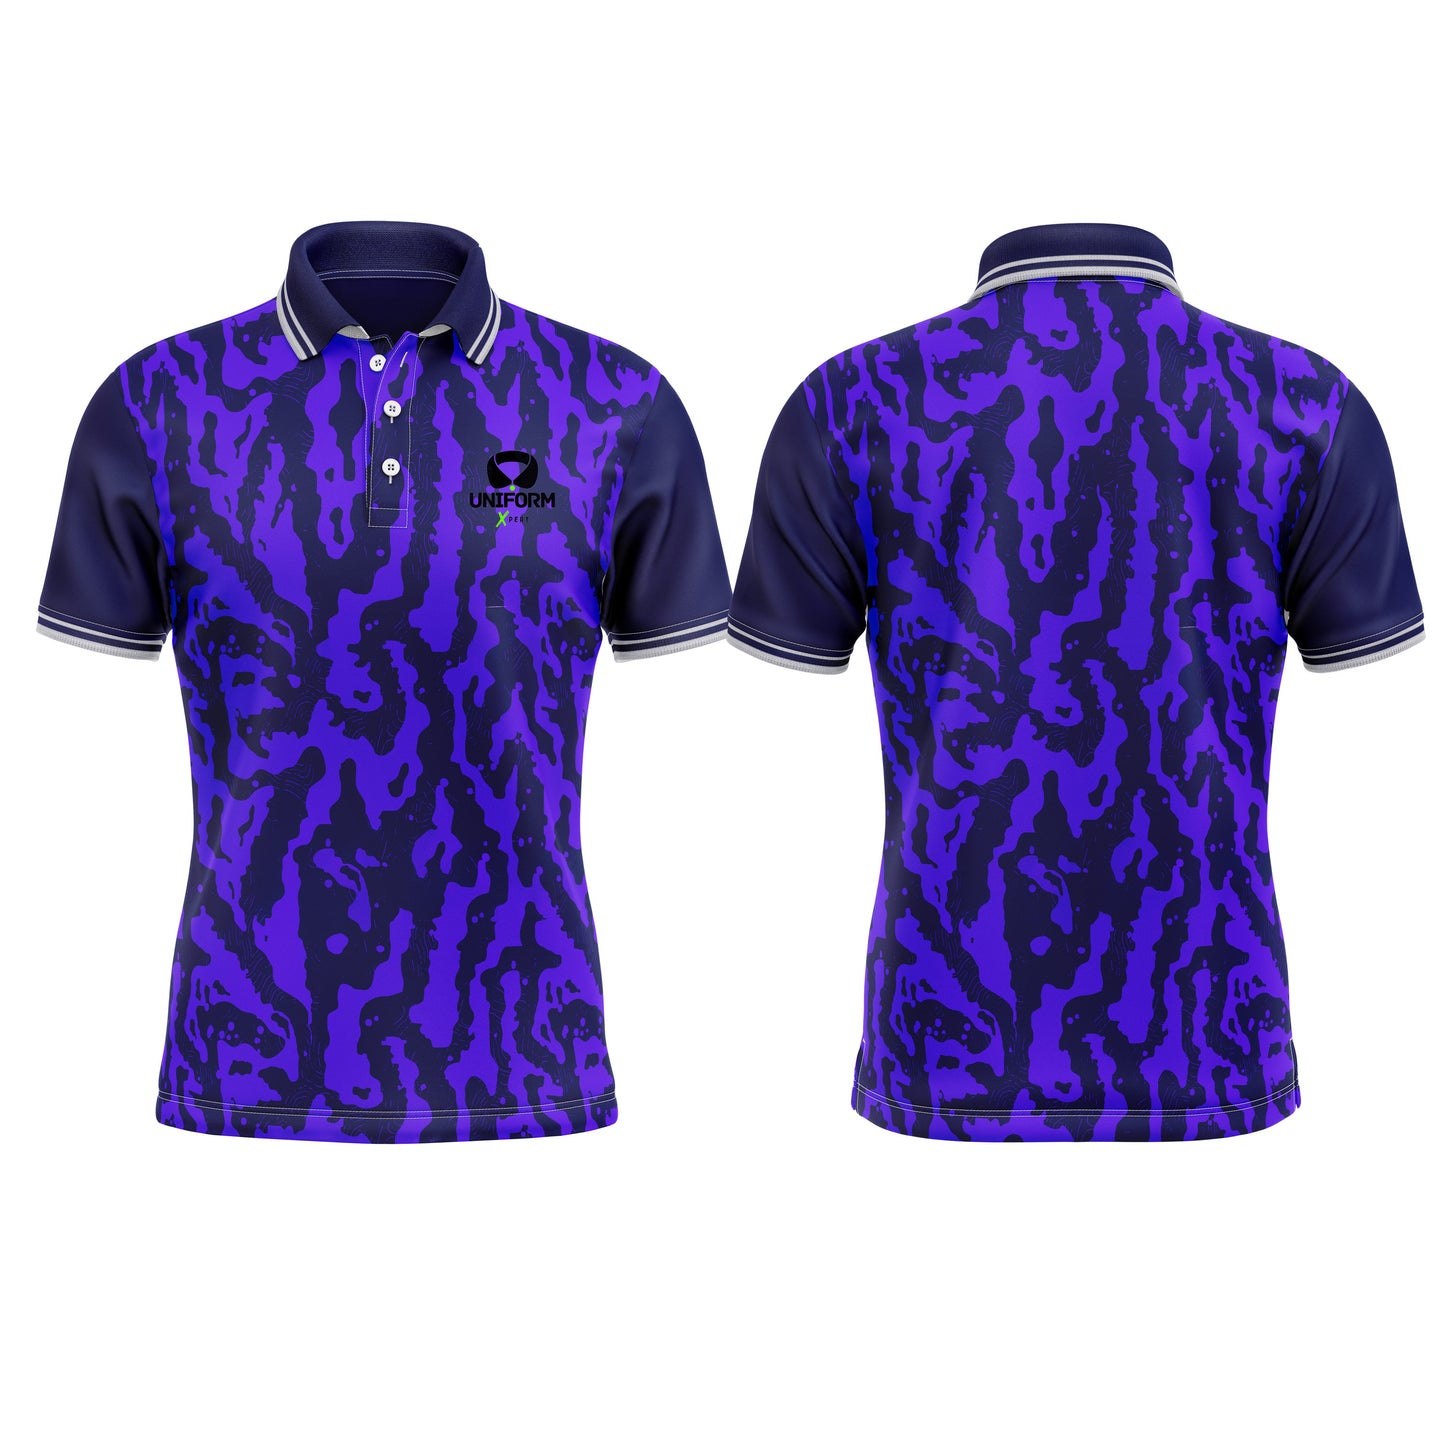 Custom Polo Shirts | Personalized Performance Apparel for Athletes